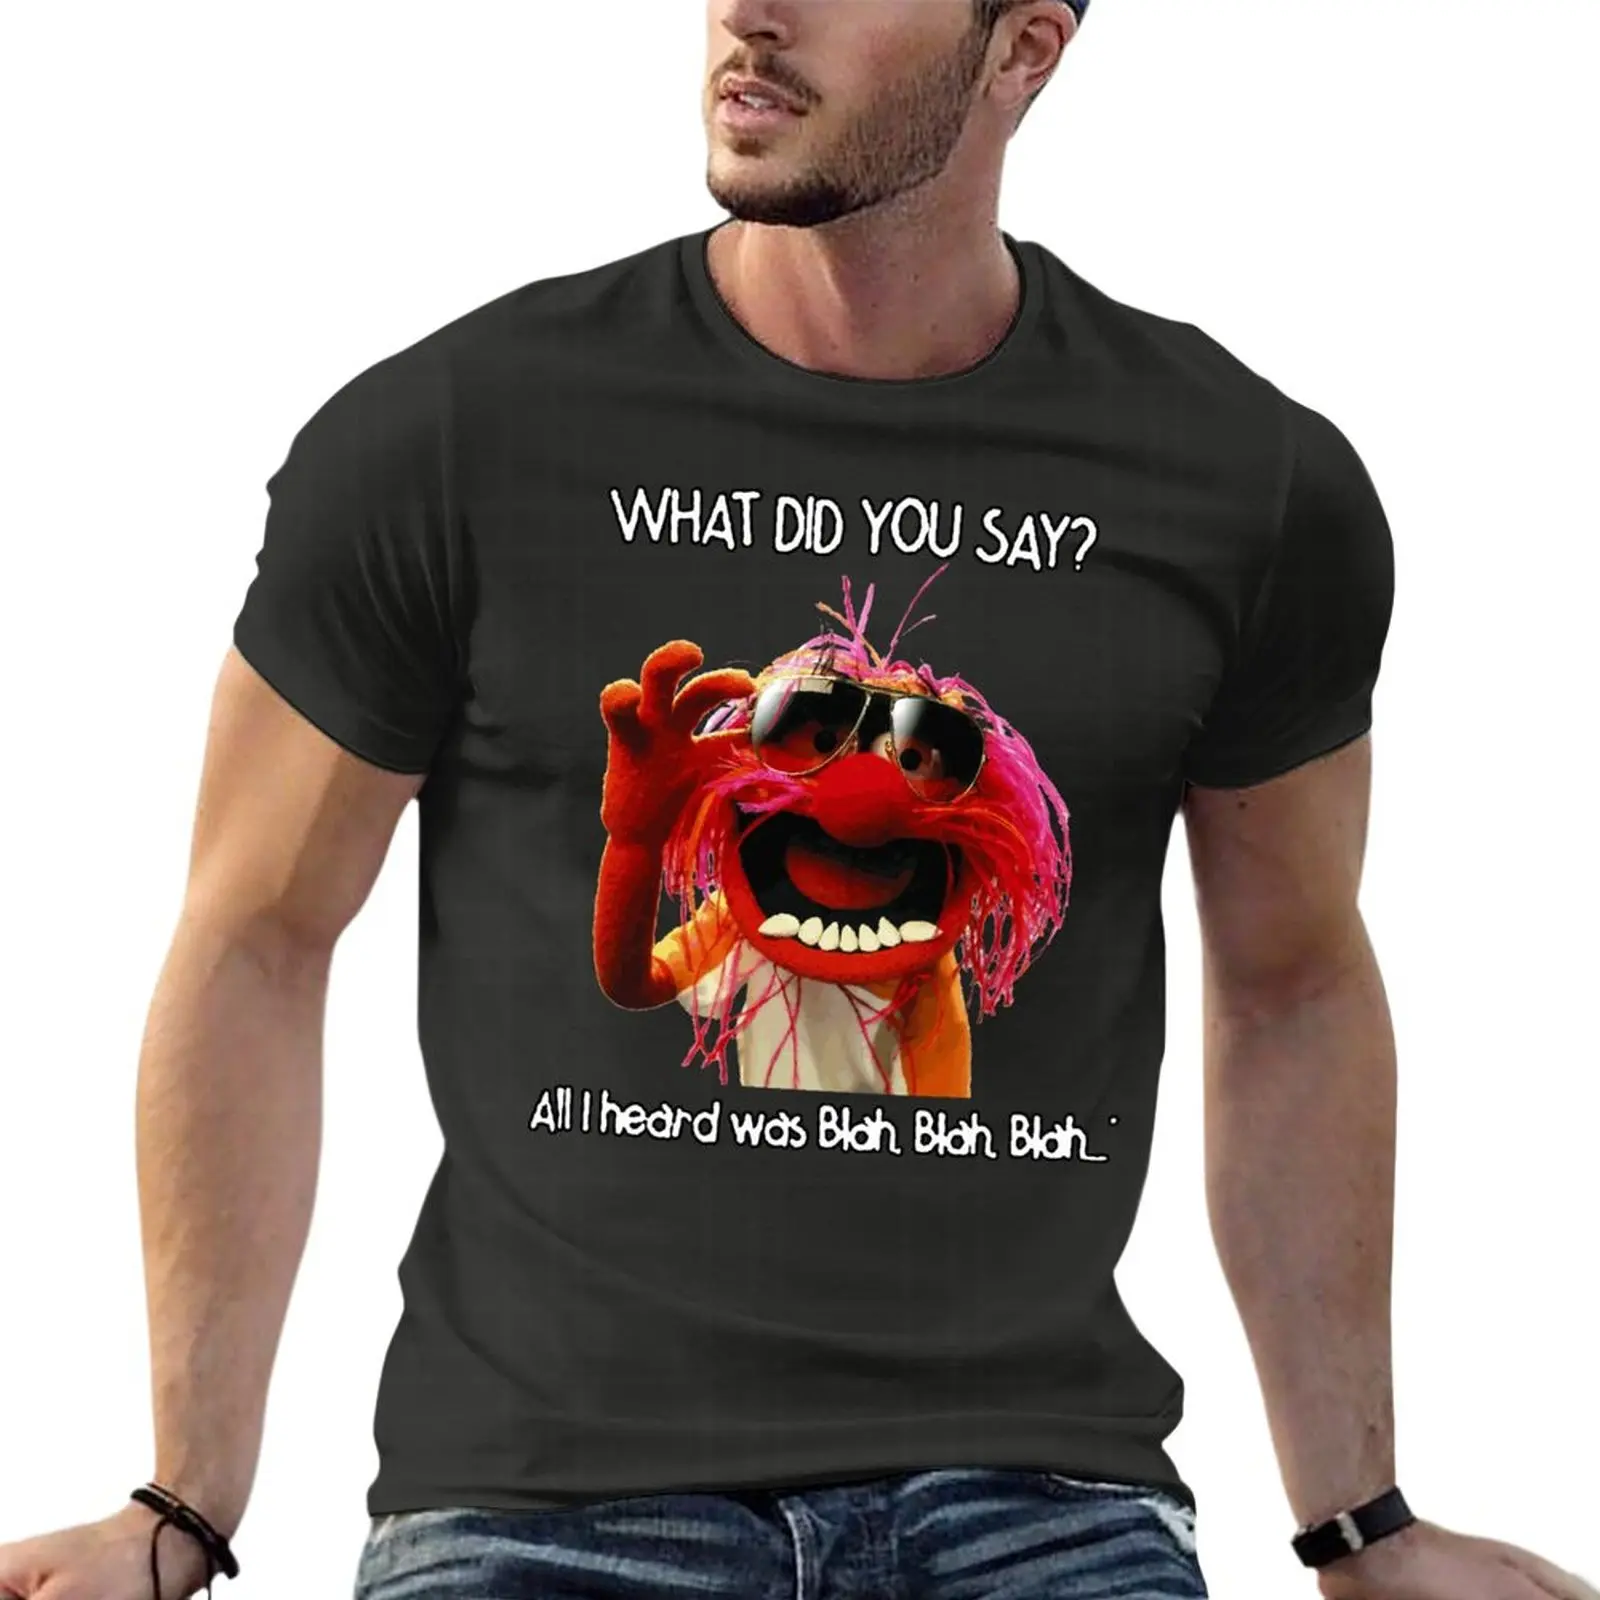 

What Did You Say All I Heard Was Blah Blah Blah Animal Muppet Oversized T Shirt Custom Men'S Clothes Short Sleeve Tops Tee